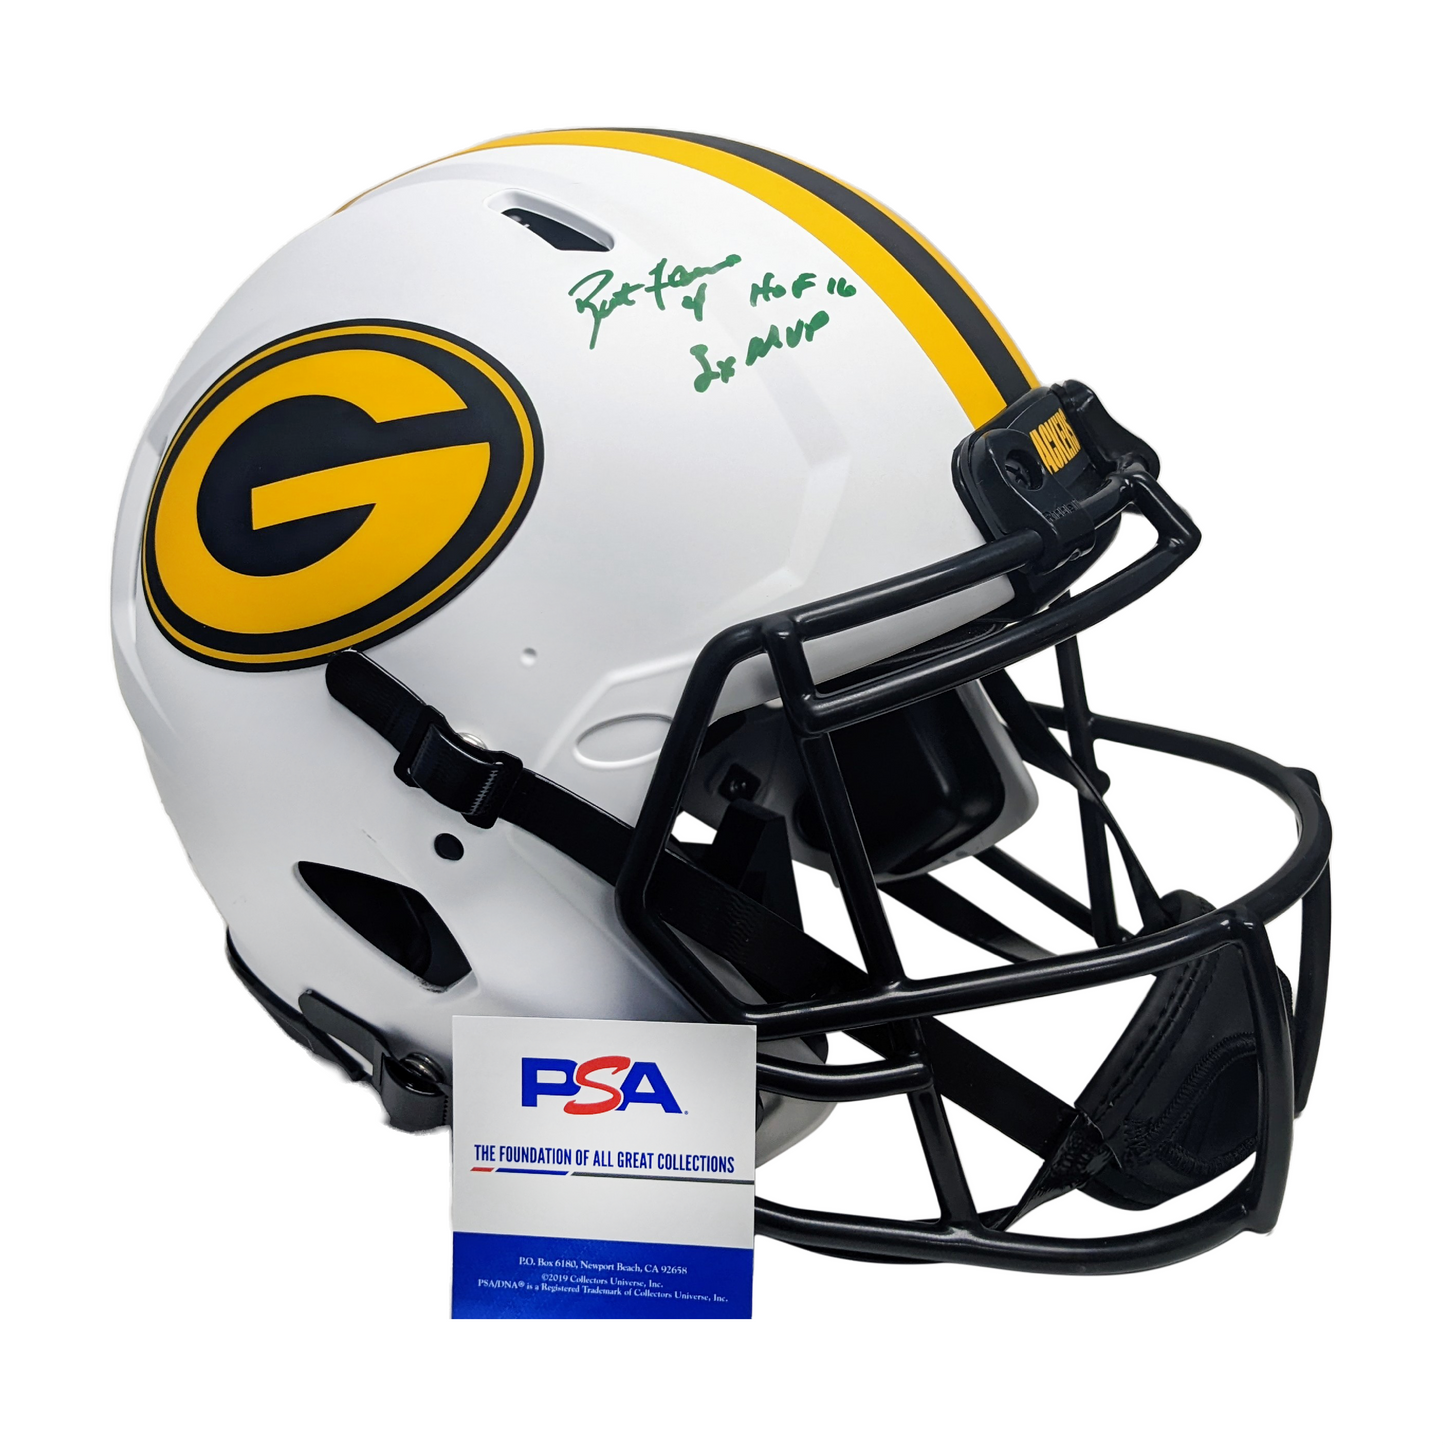 Brett Favre Autographed Hand Signed Green Bay Packers Lunar Full Size Authentic Football Helmet with HOF 16 and 3x MVP Inscriptions - PSA Authentication